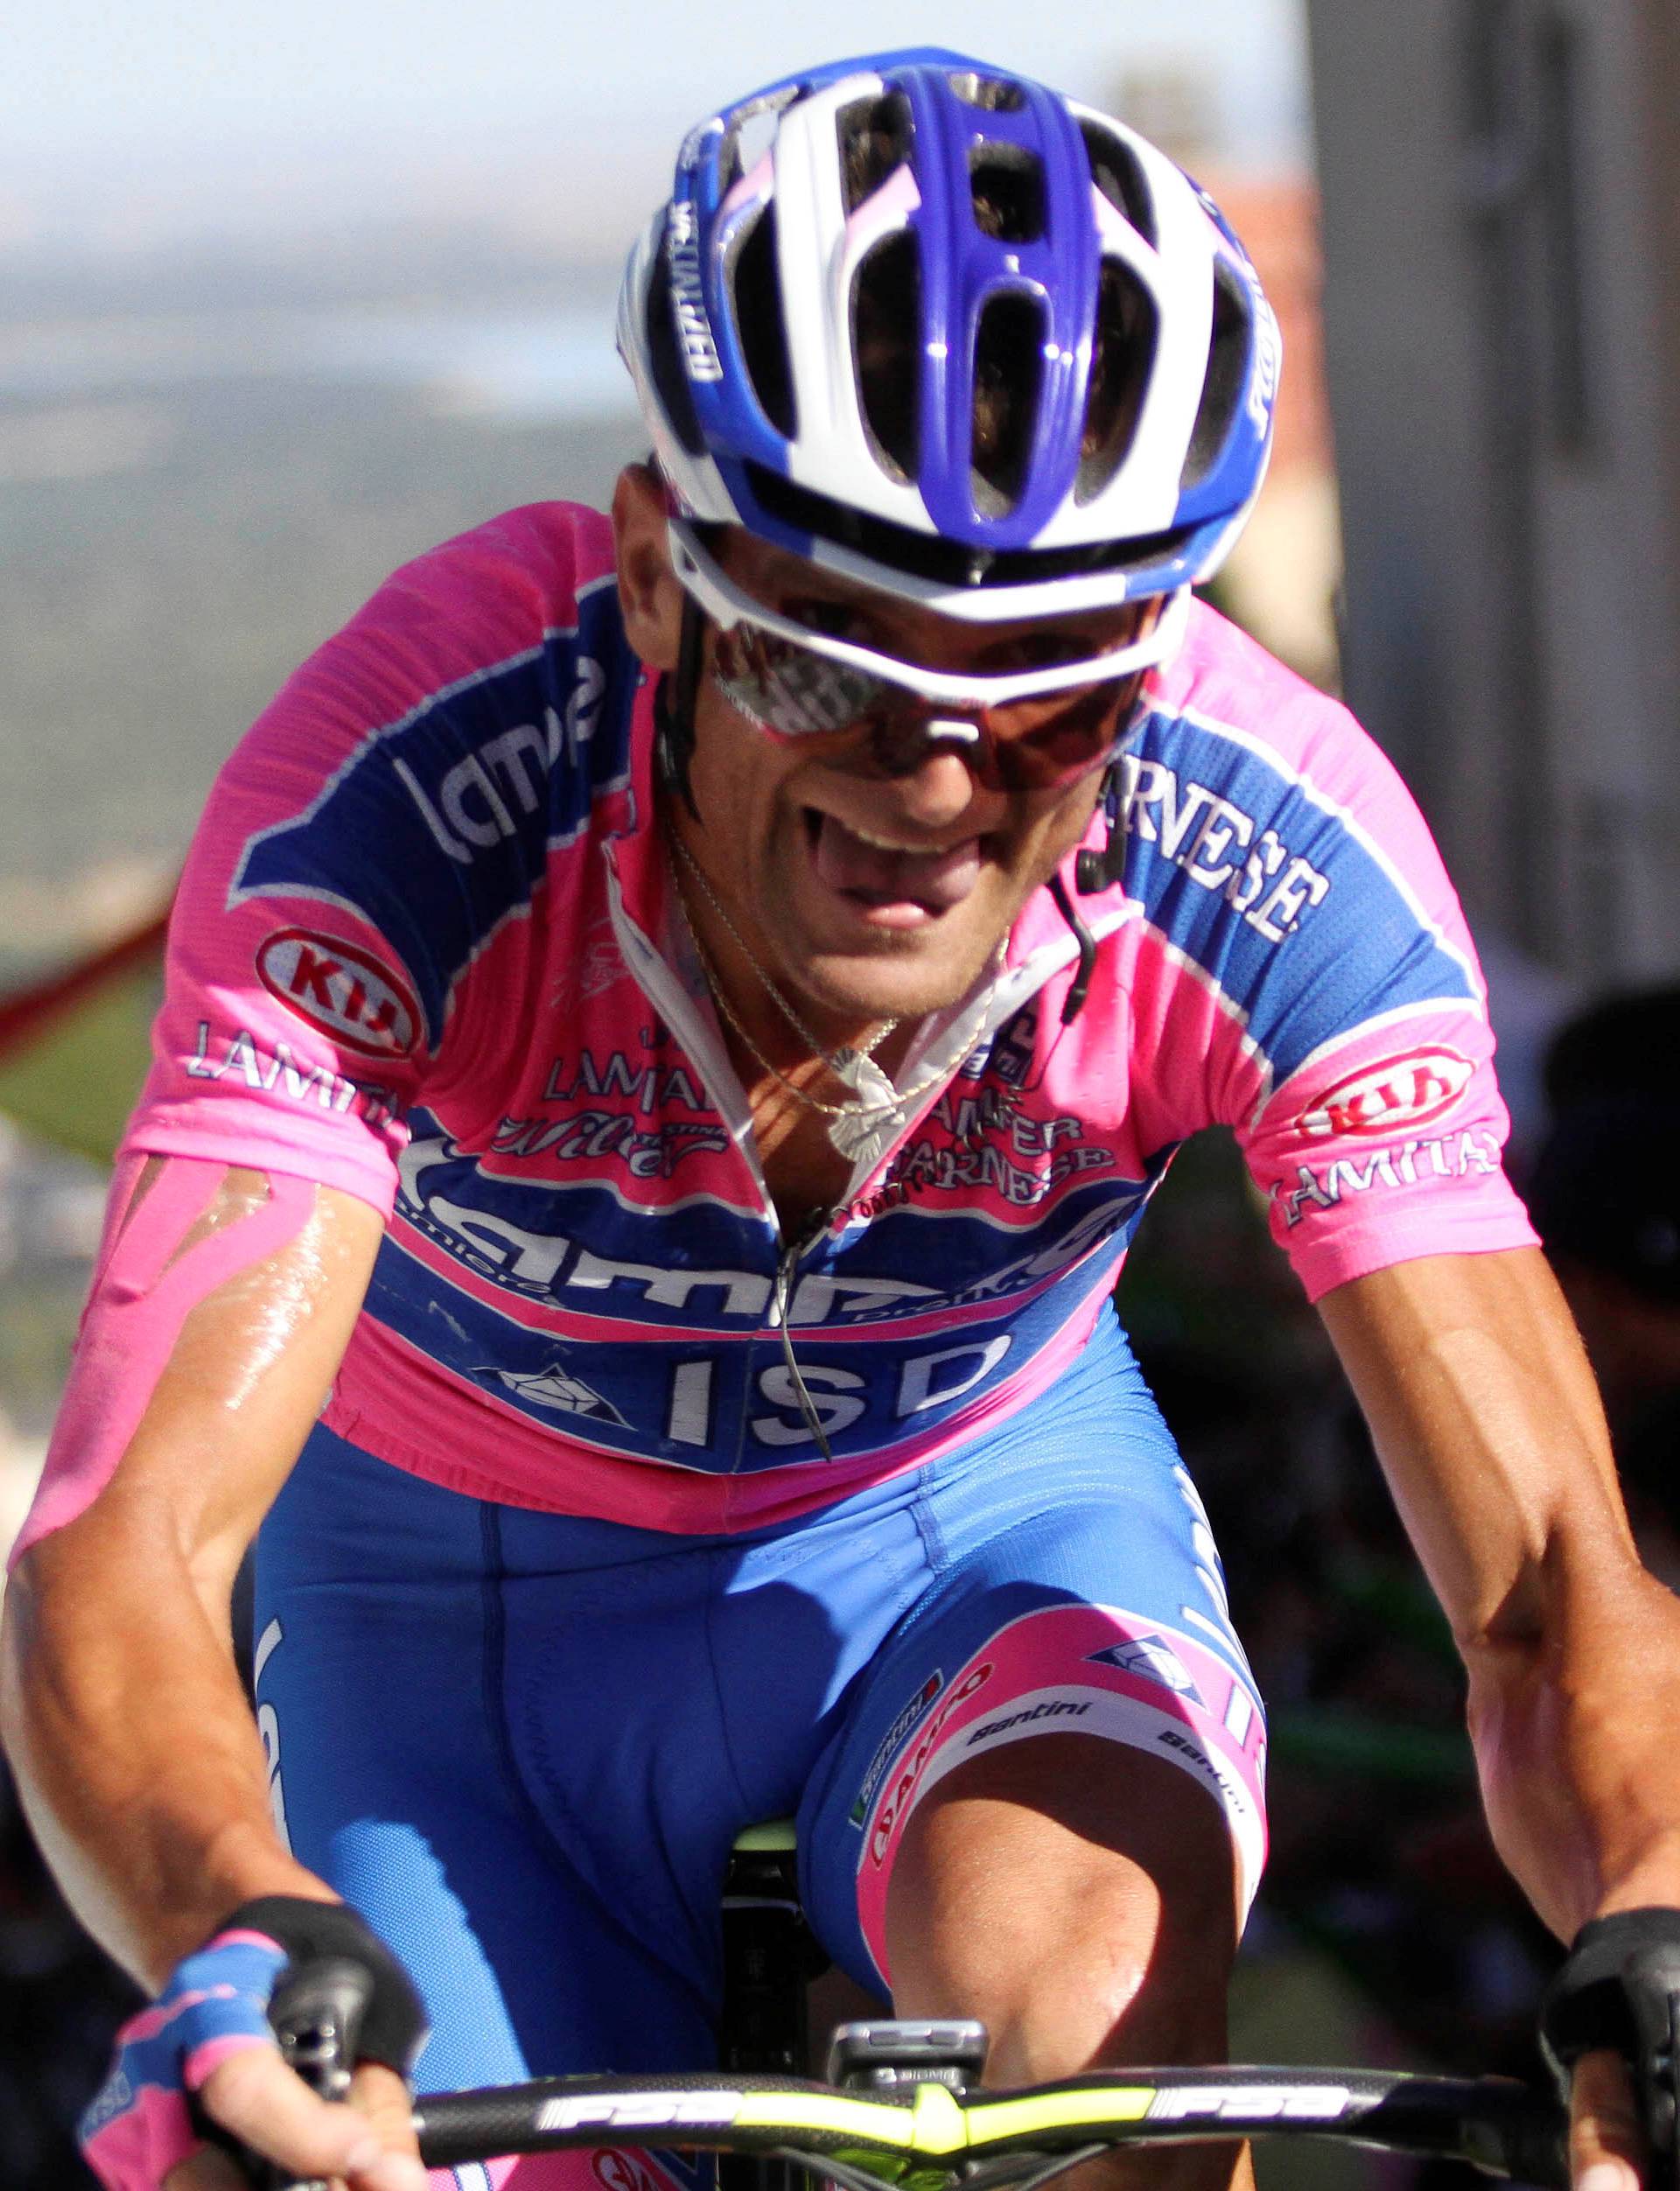 FILE PHOTO: Lampre's Scarponi of Italy cycles during eighth stage of the Tour of Spain cycling race between Talavera de la Reina and San Lorenzo de El Escorial